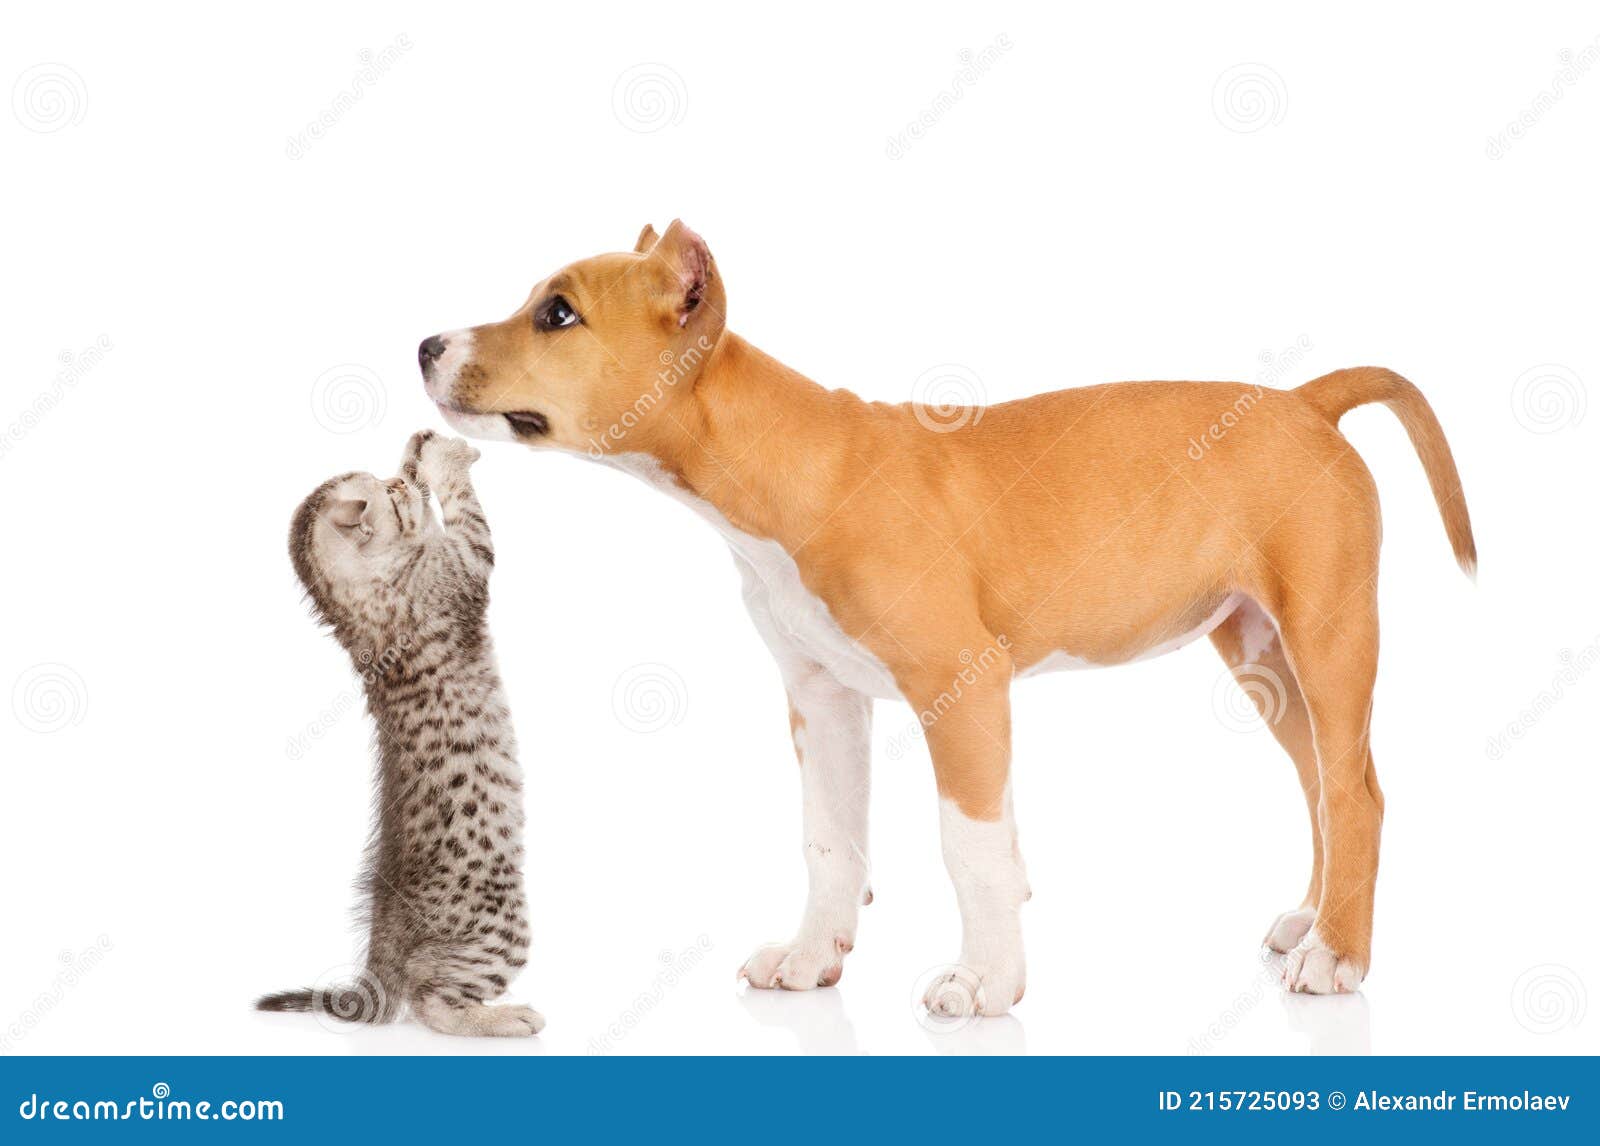 kitten playing with stafford puppy.  on white background